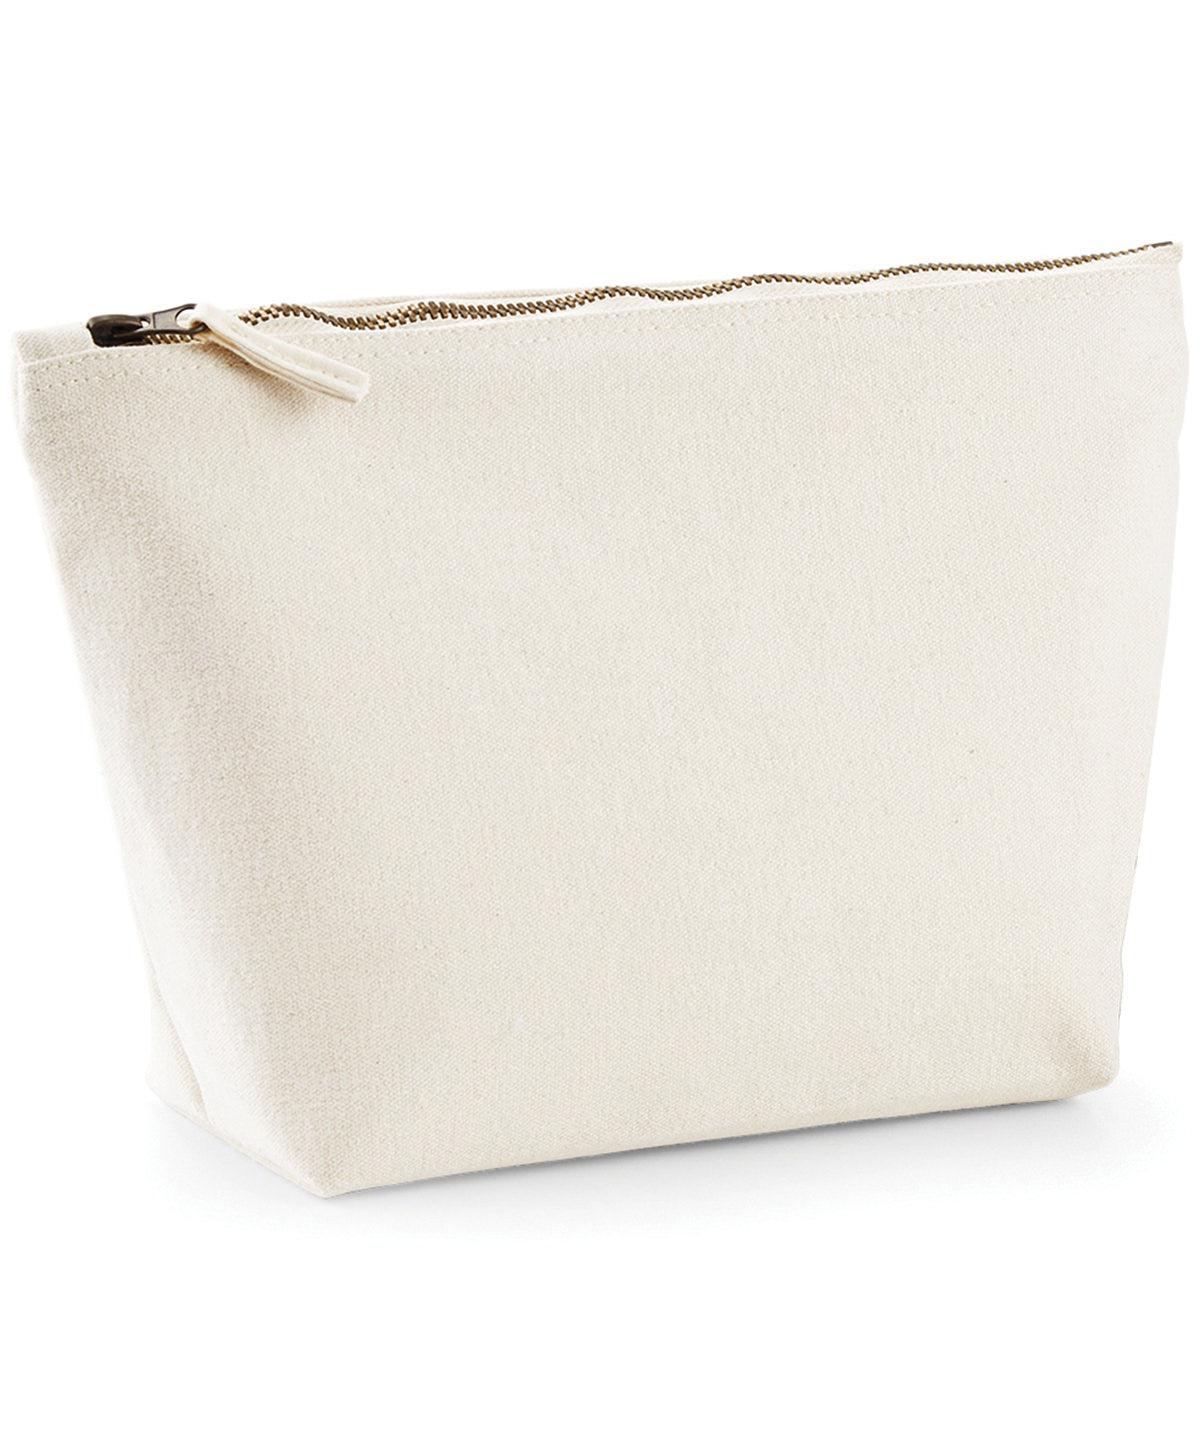 Natural - Canvas accessory bag Bags Westford Mill Bags & Luggage, Must Haves Schoolwear Centres